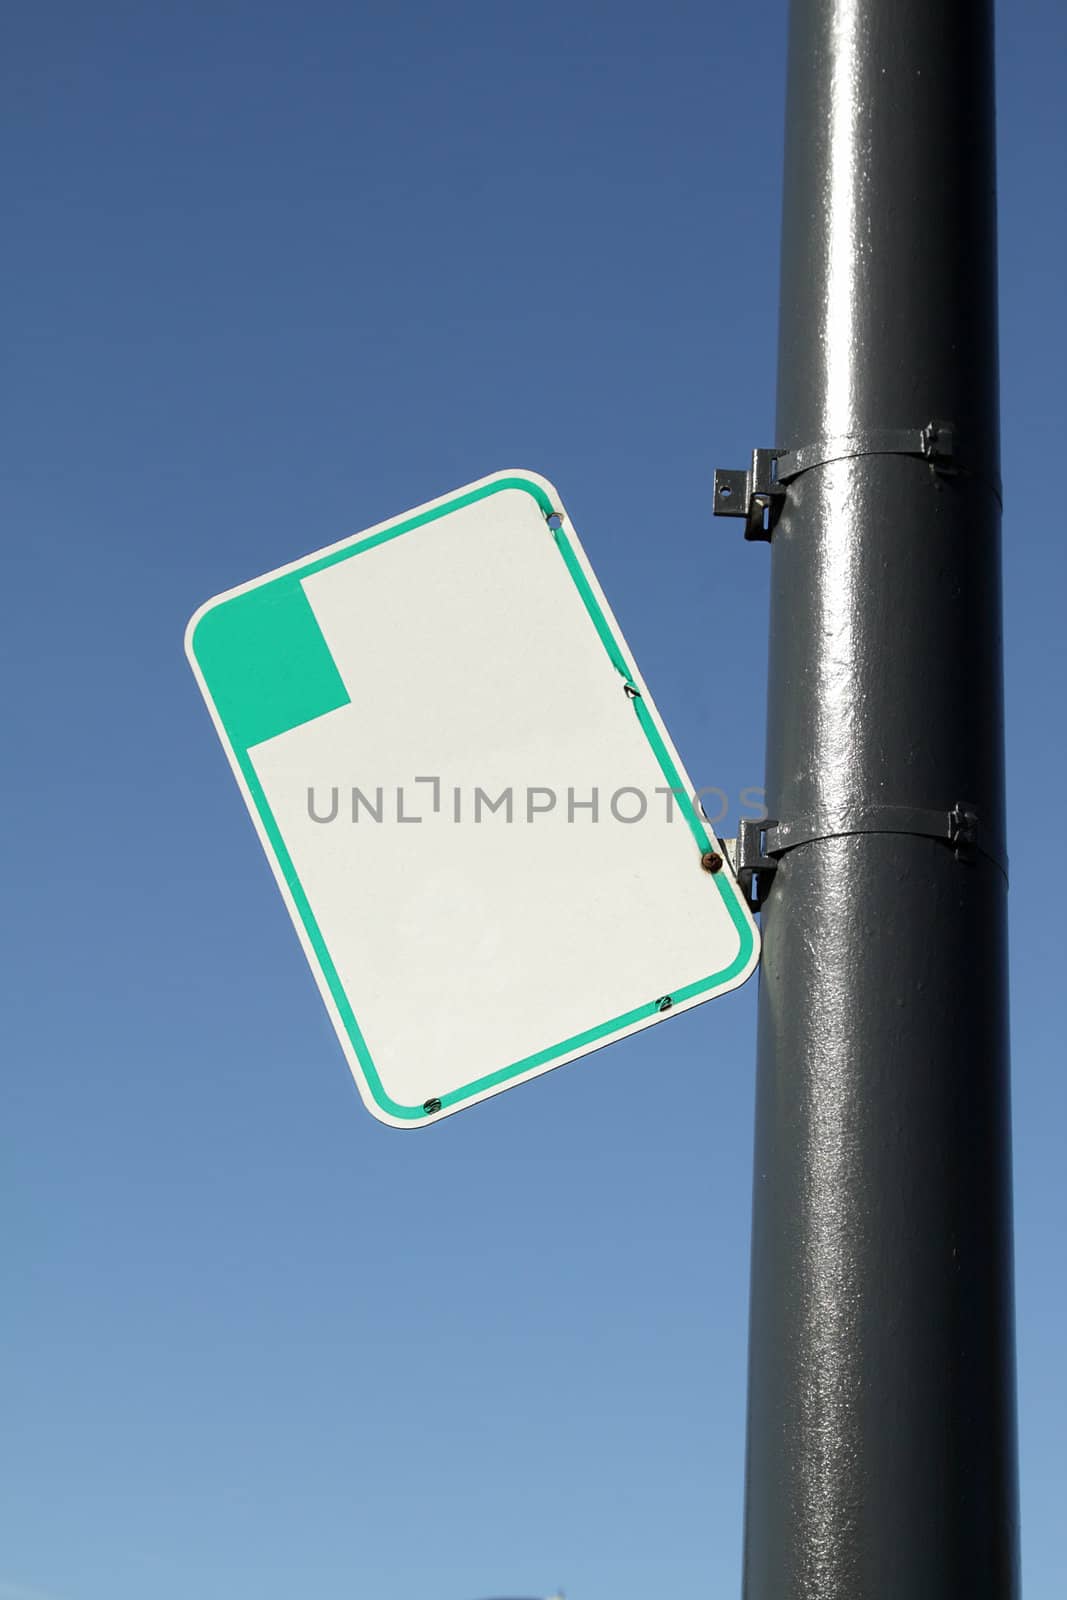 Blank parking sign on the pole on sunny day